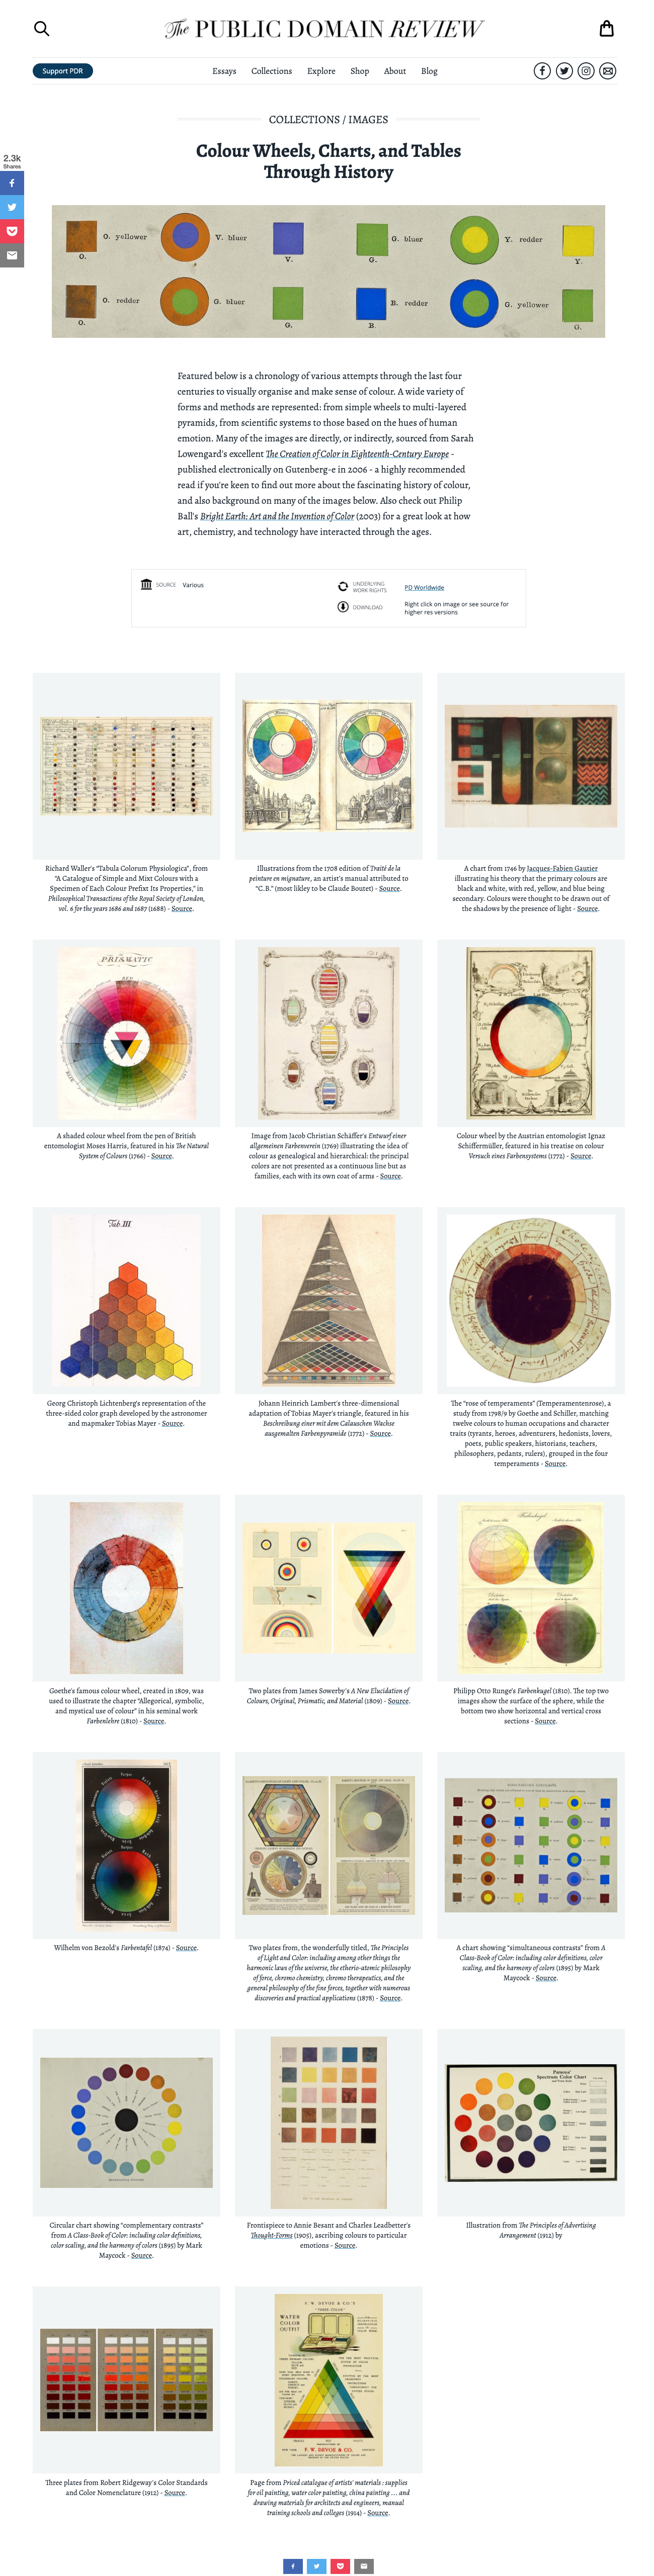 colour-publicdomainreview-org-collection-colour-wheels-charts-and-tables-through-history-2020-05-12-04_55_18